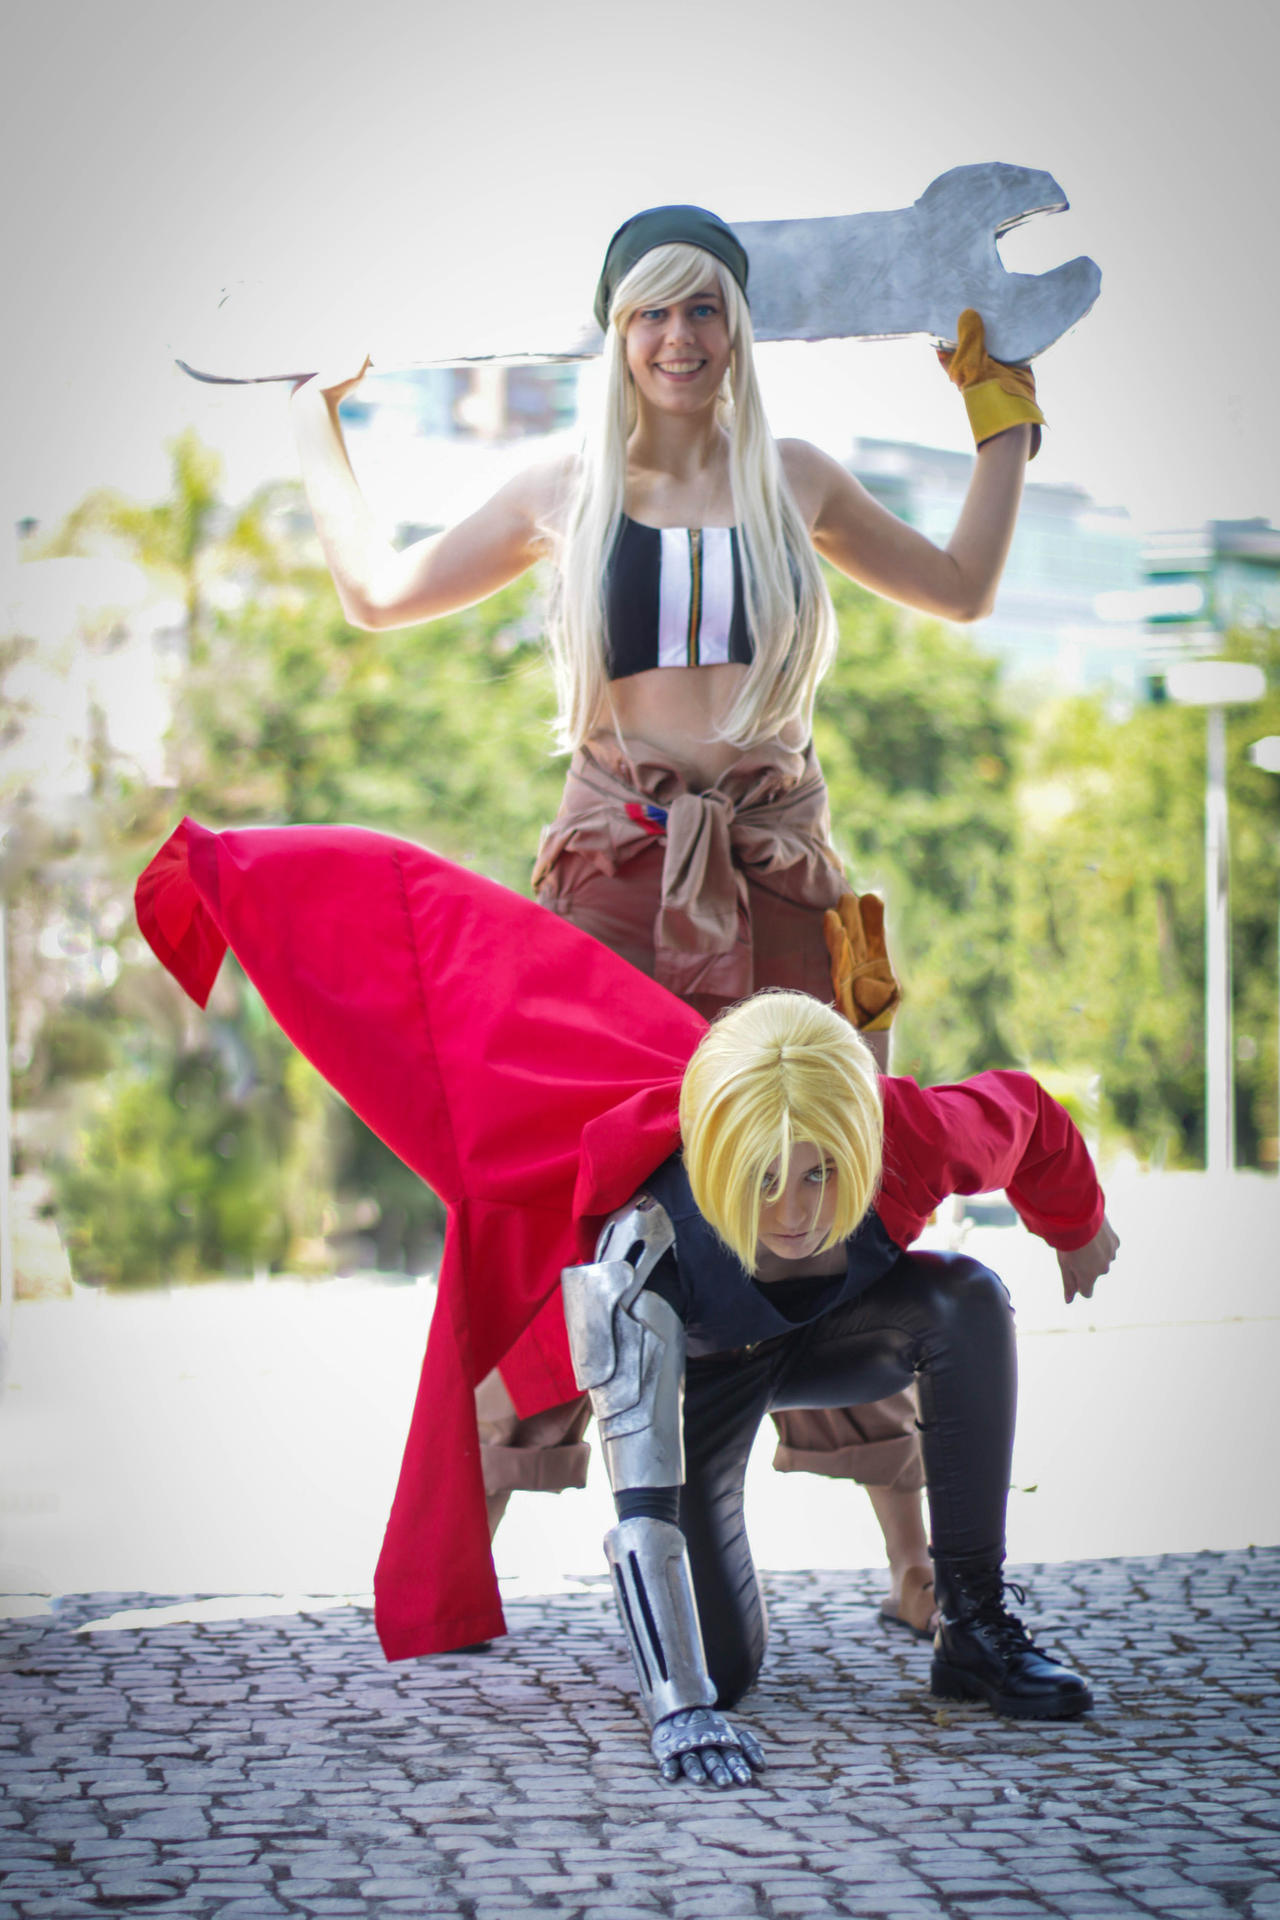 Fullmetal Alchemist: 10 Excellent Edward Elric Cosplay To Check Out